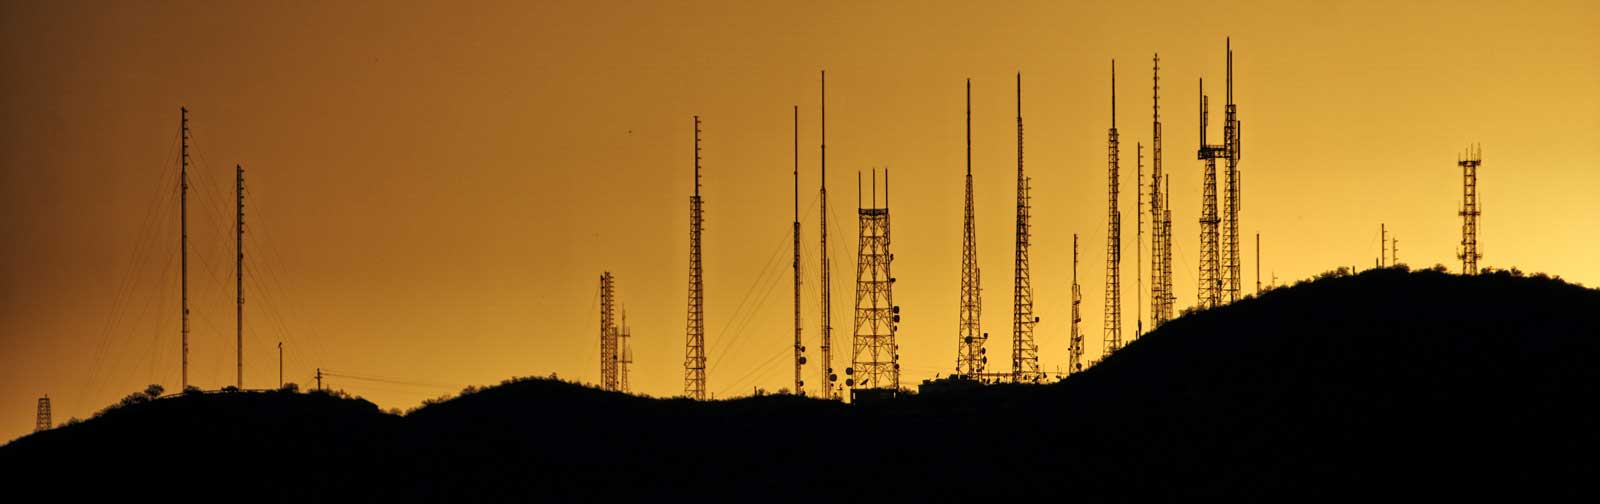 Transmission Towers On A Hill